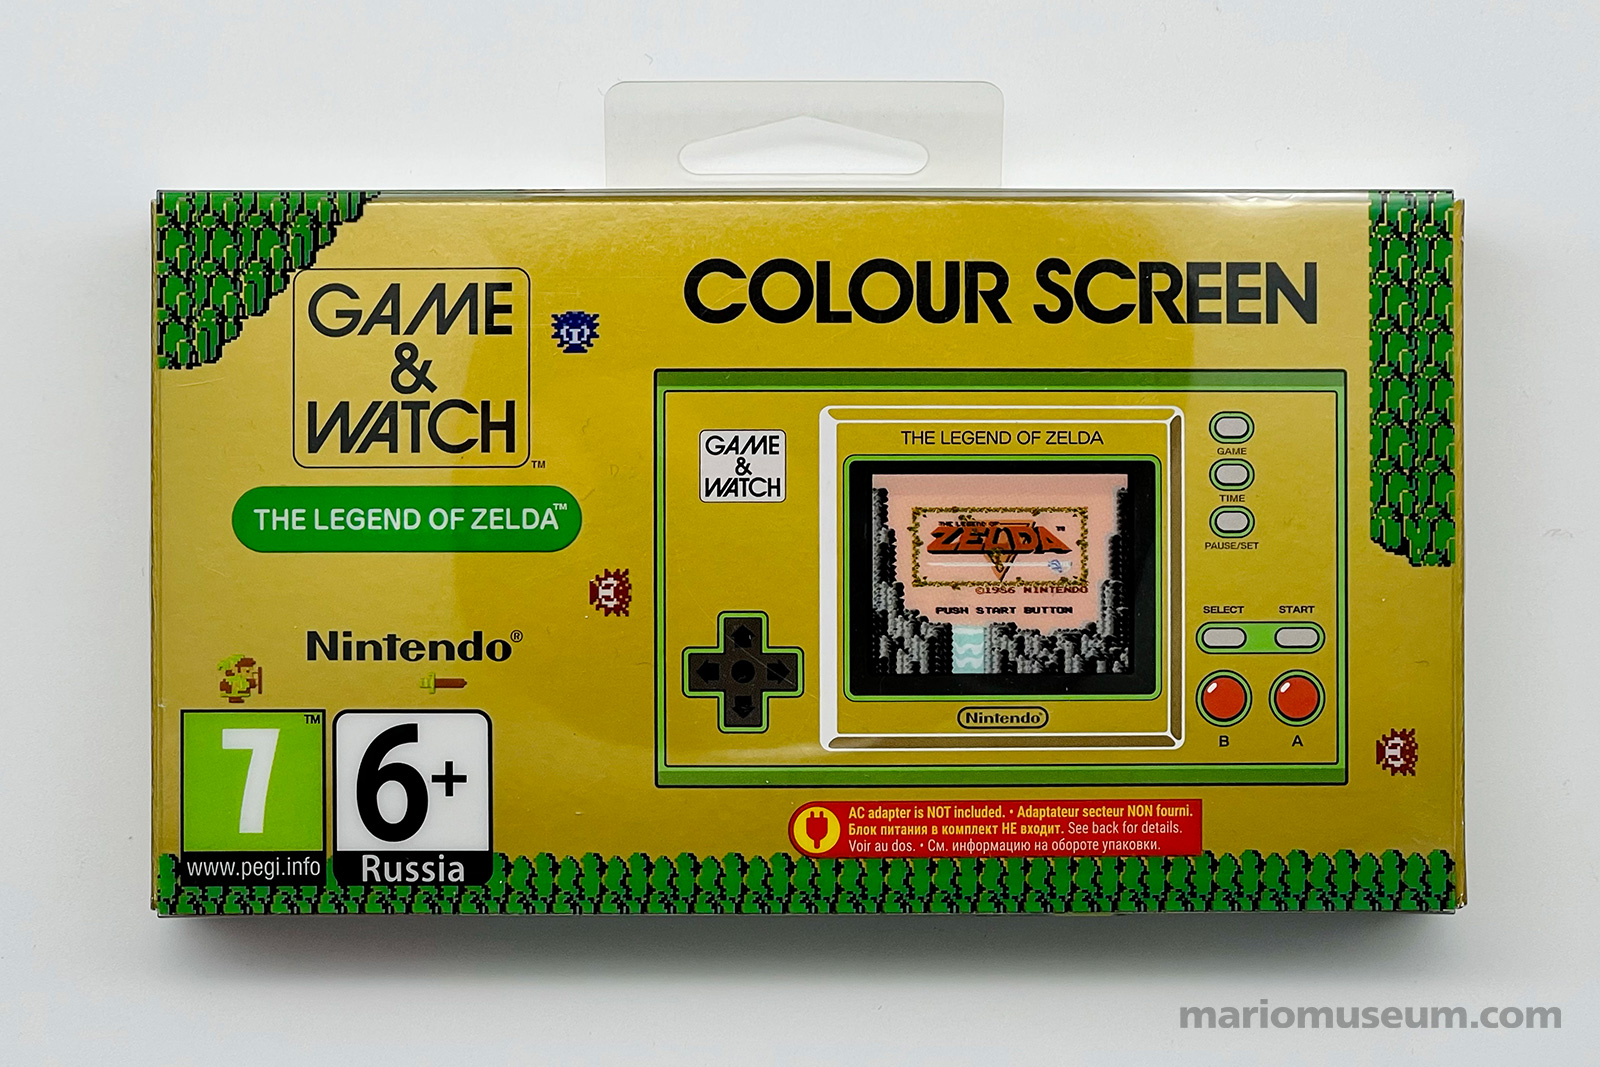 Game & Watch The Legend of Zelda Colour Screen